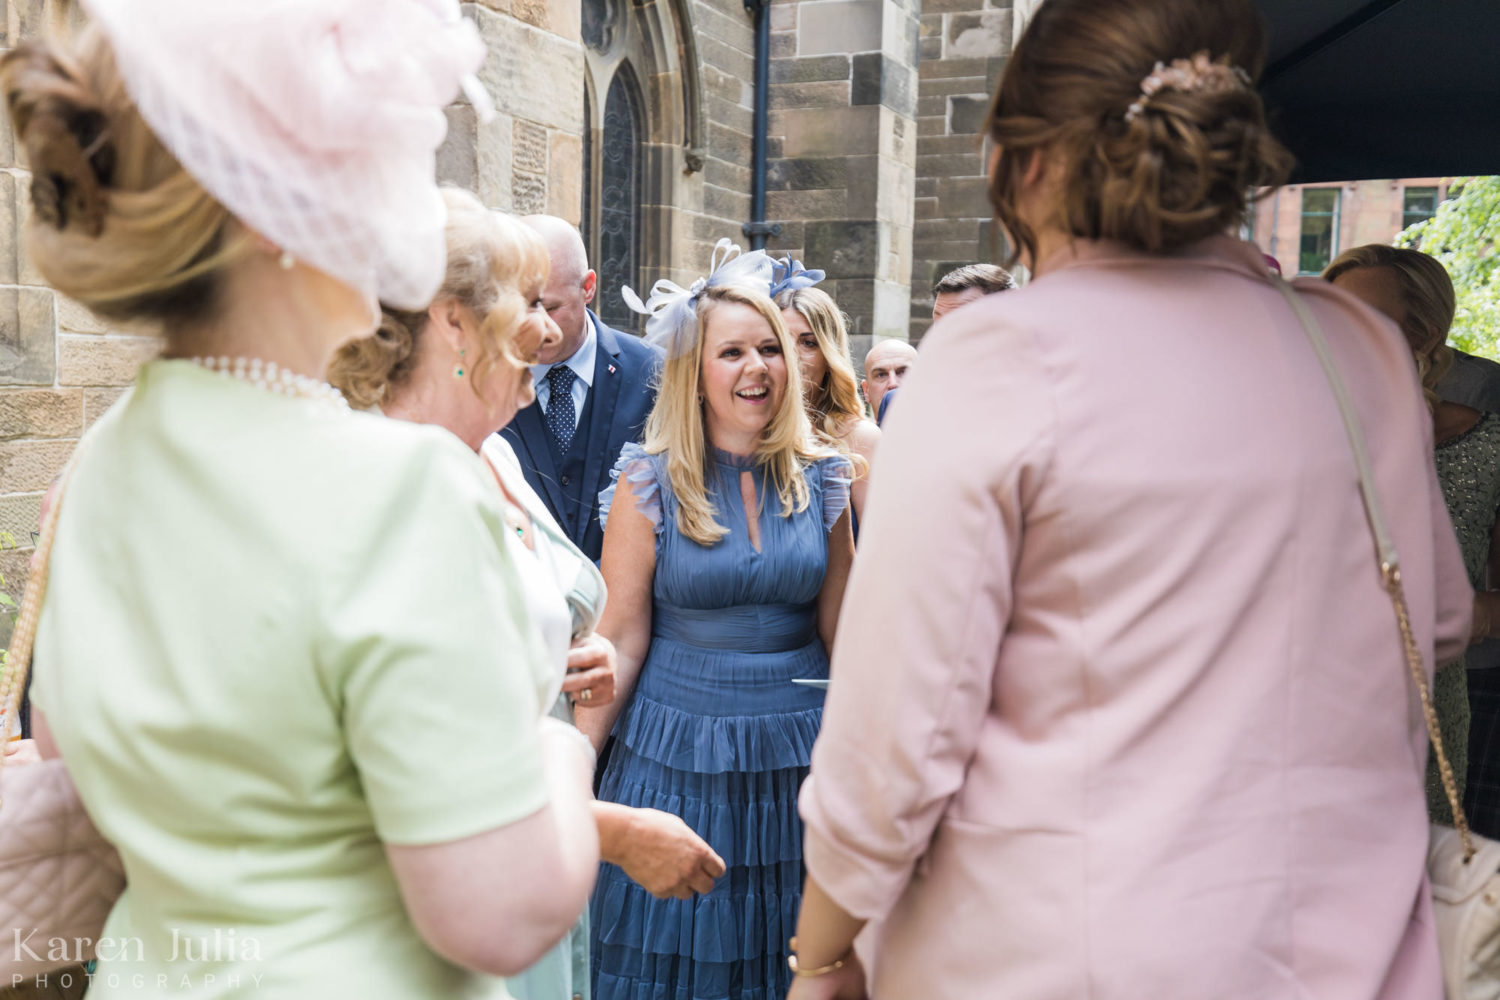 wedding guests chatting outside Cottiers in the courtyard before the wedding ceremony